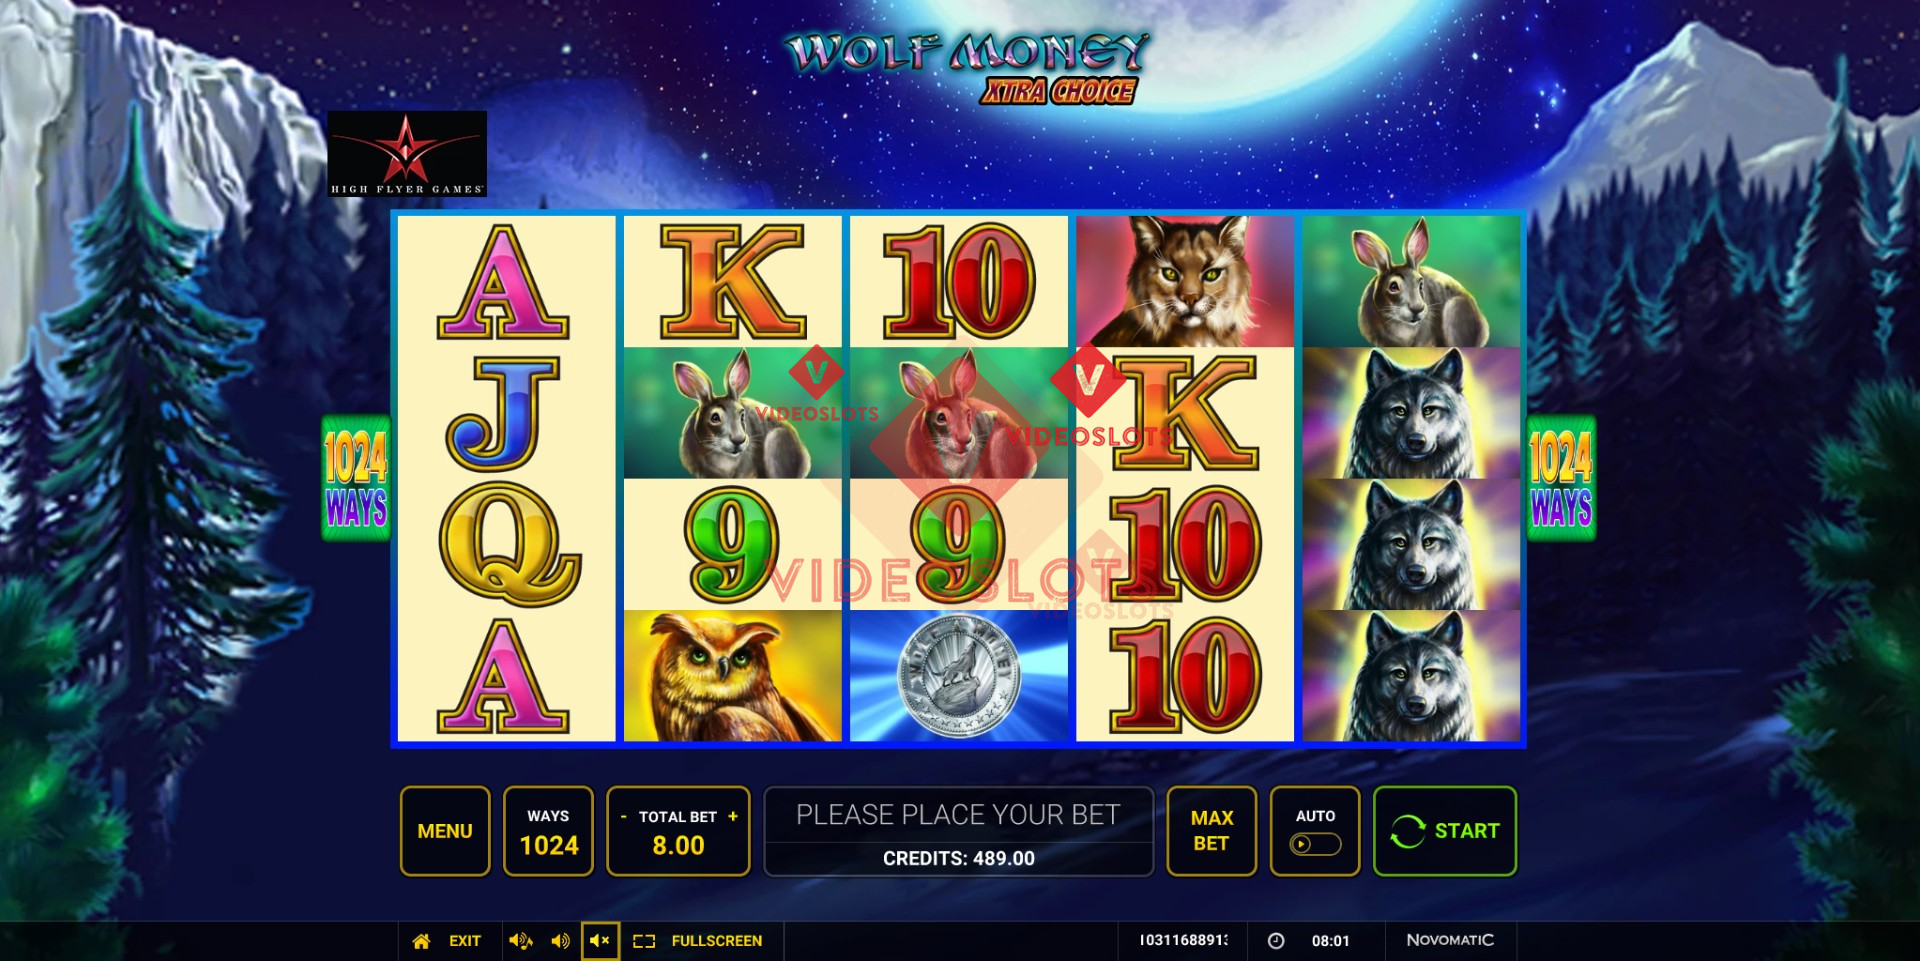 Base Game for Wolf Money Xtra Choice slot from Greentube